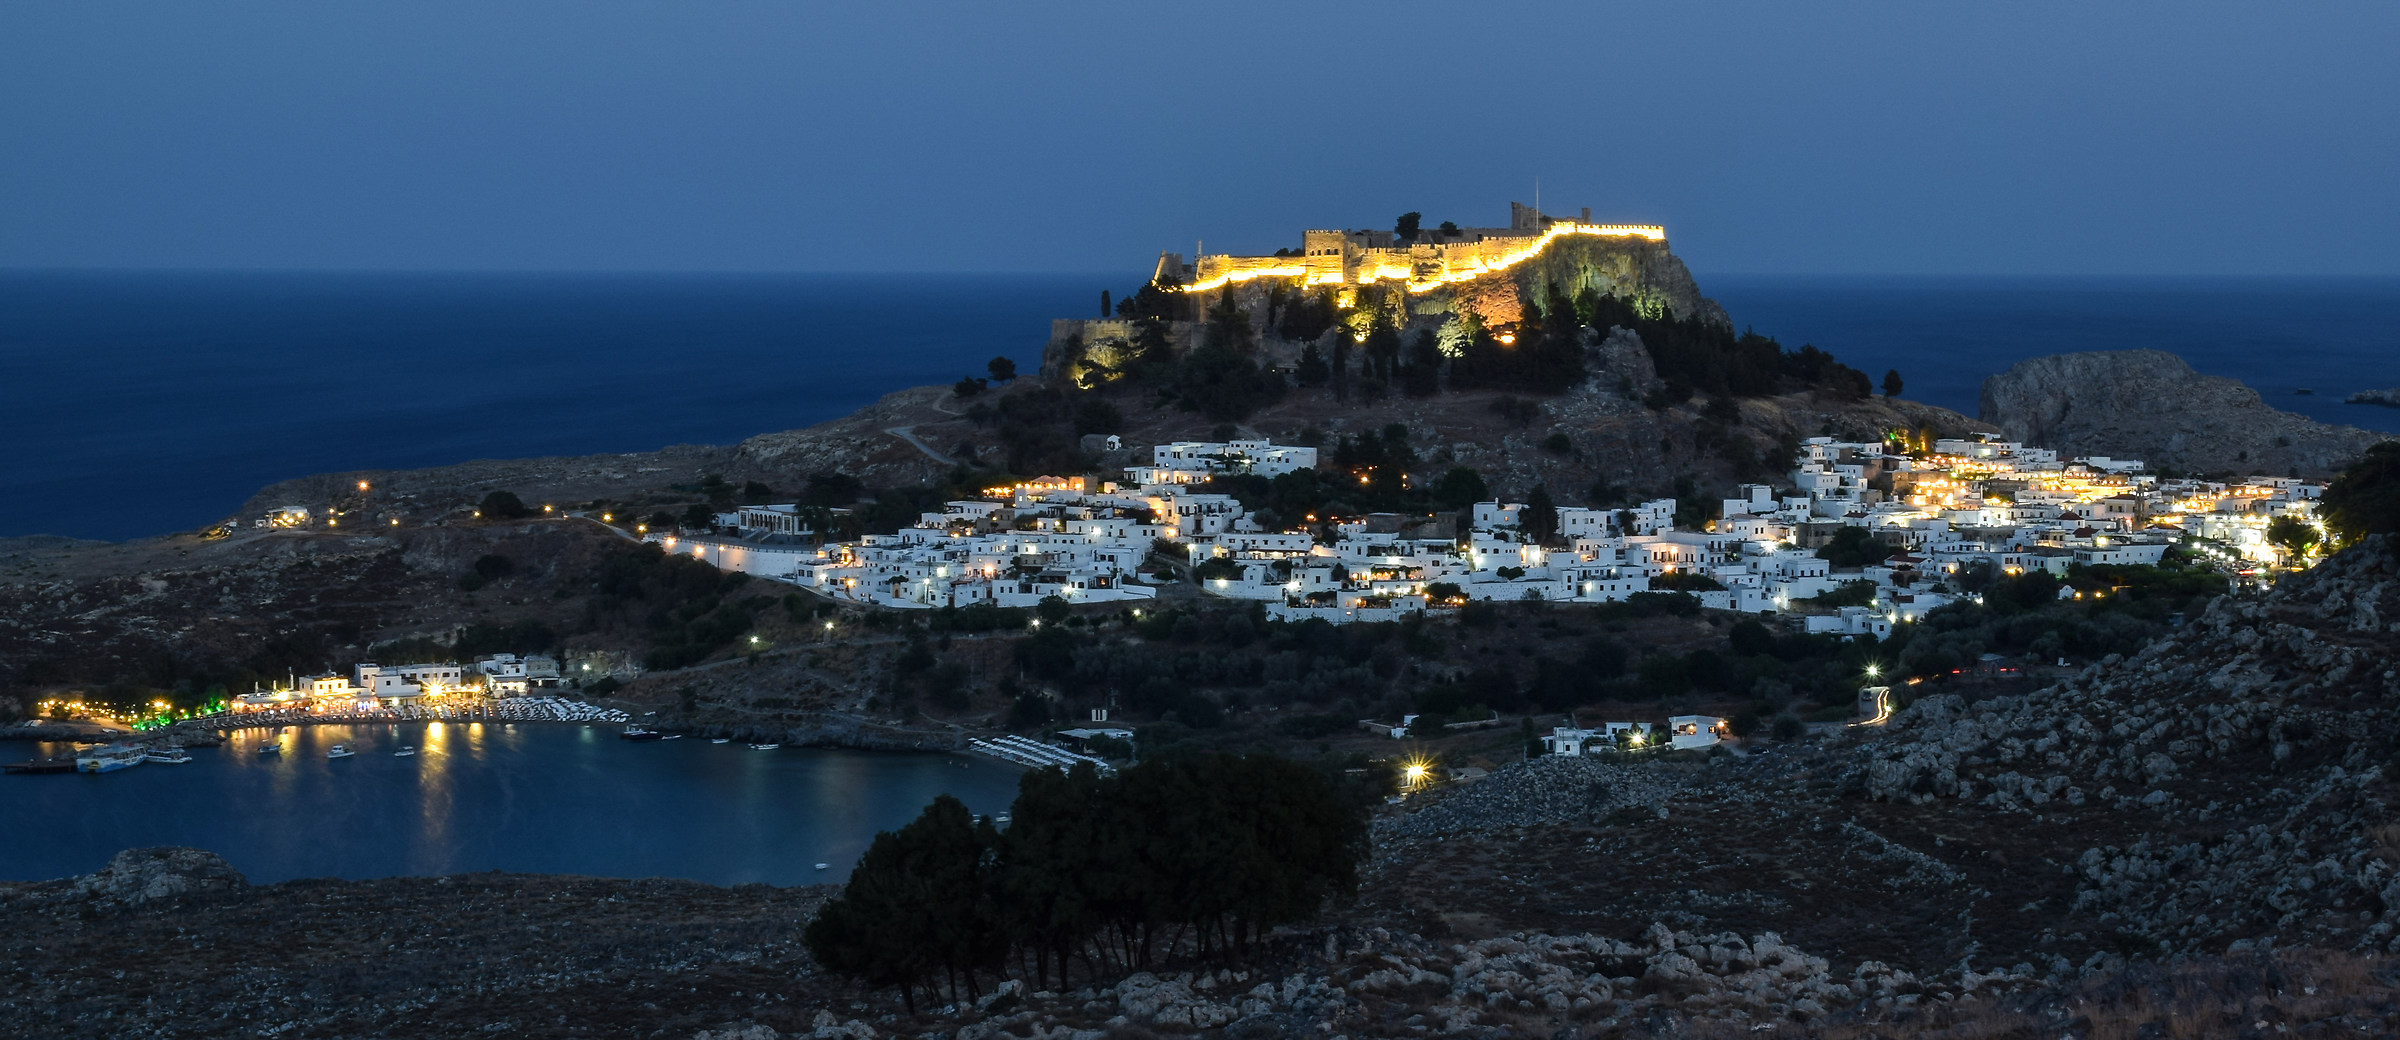 the beauty of lindos...